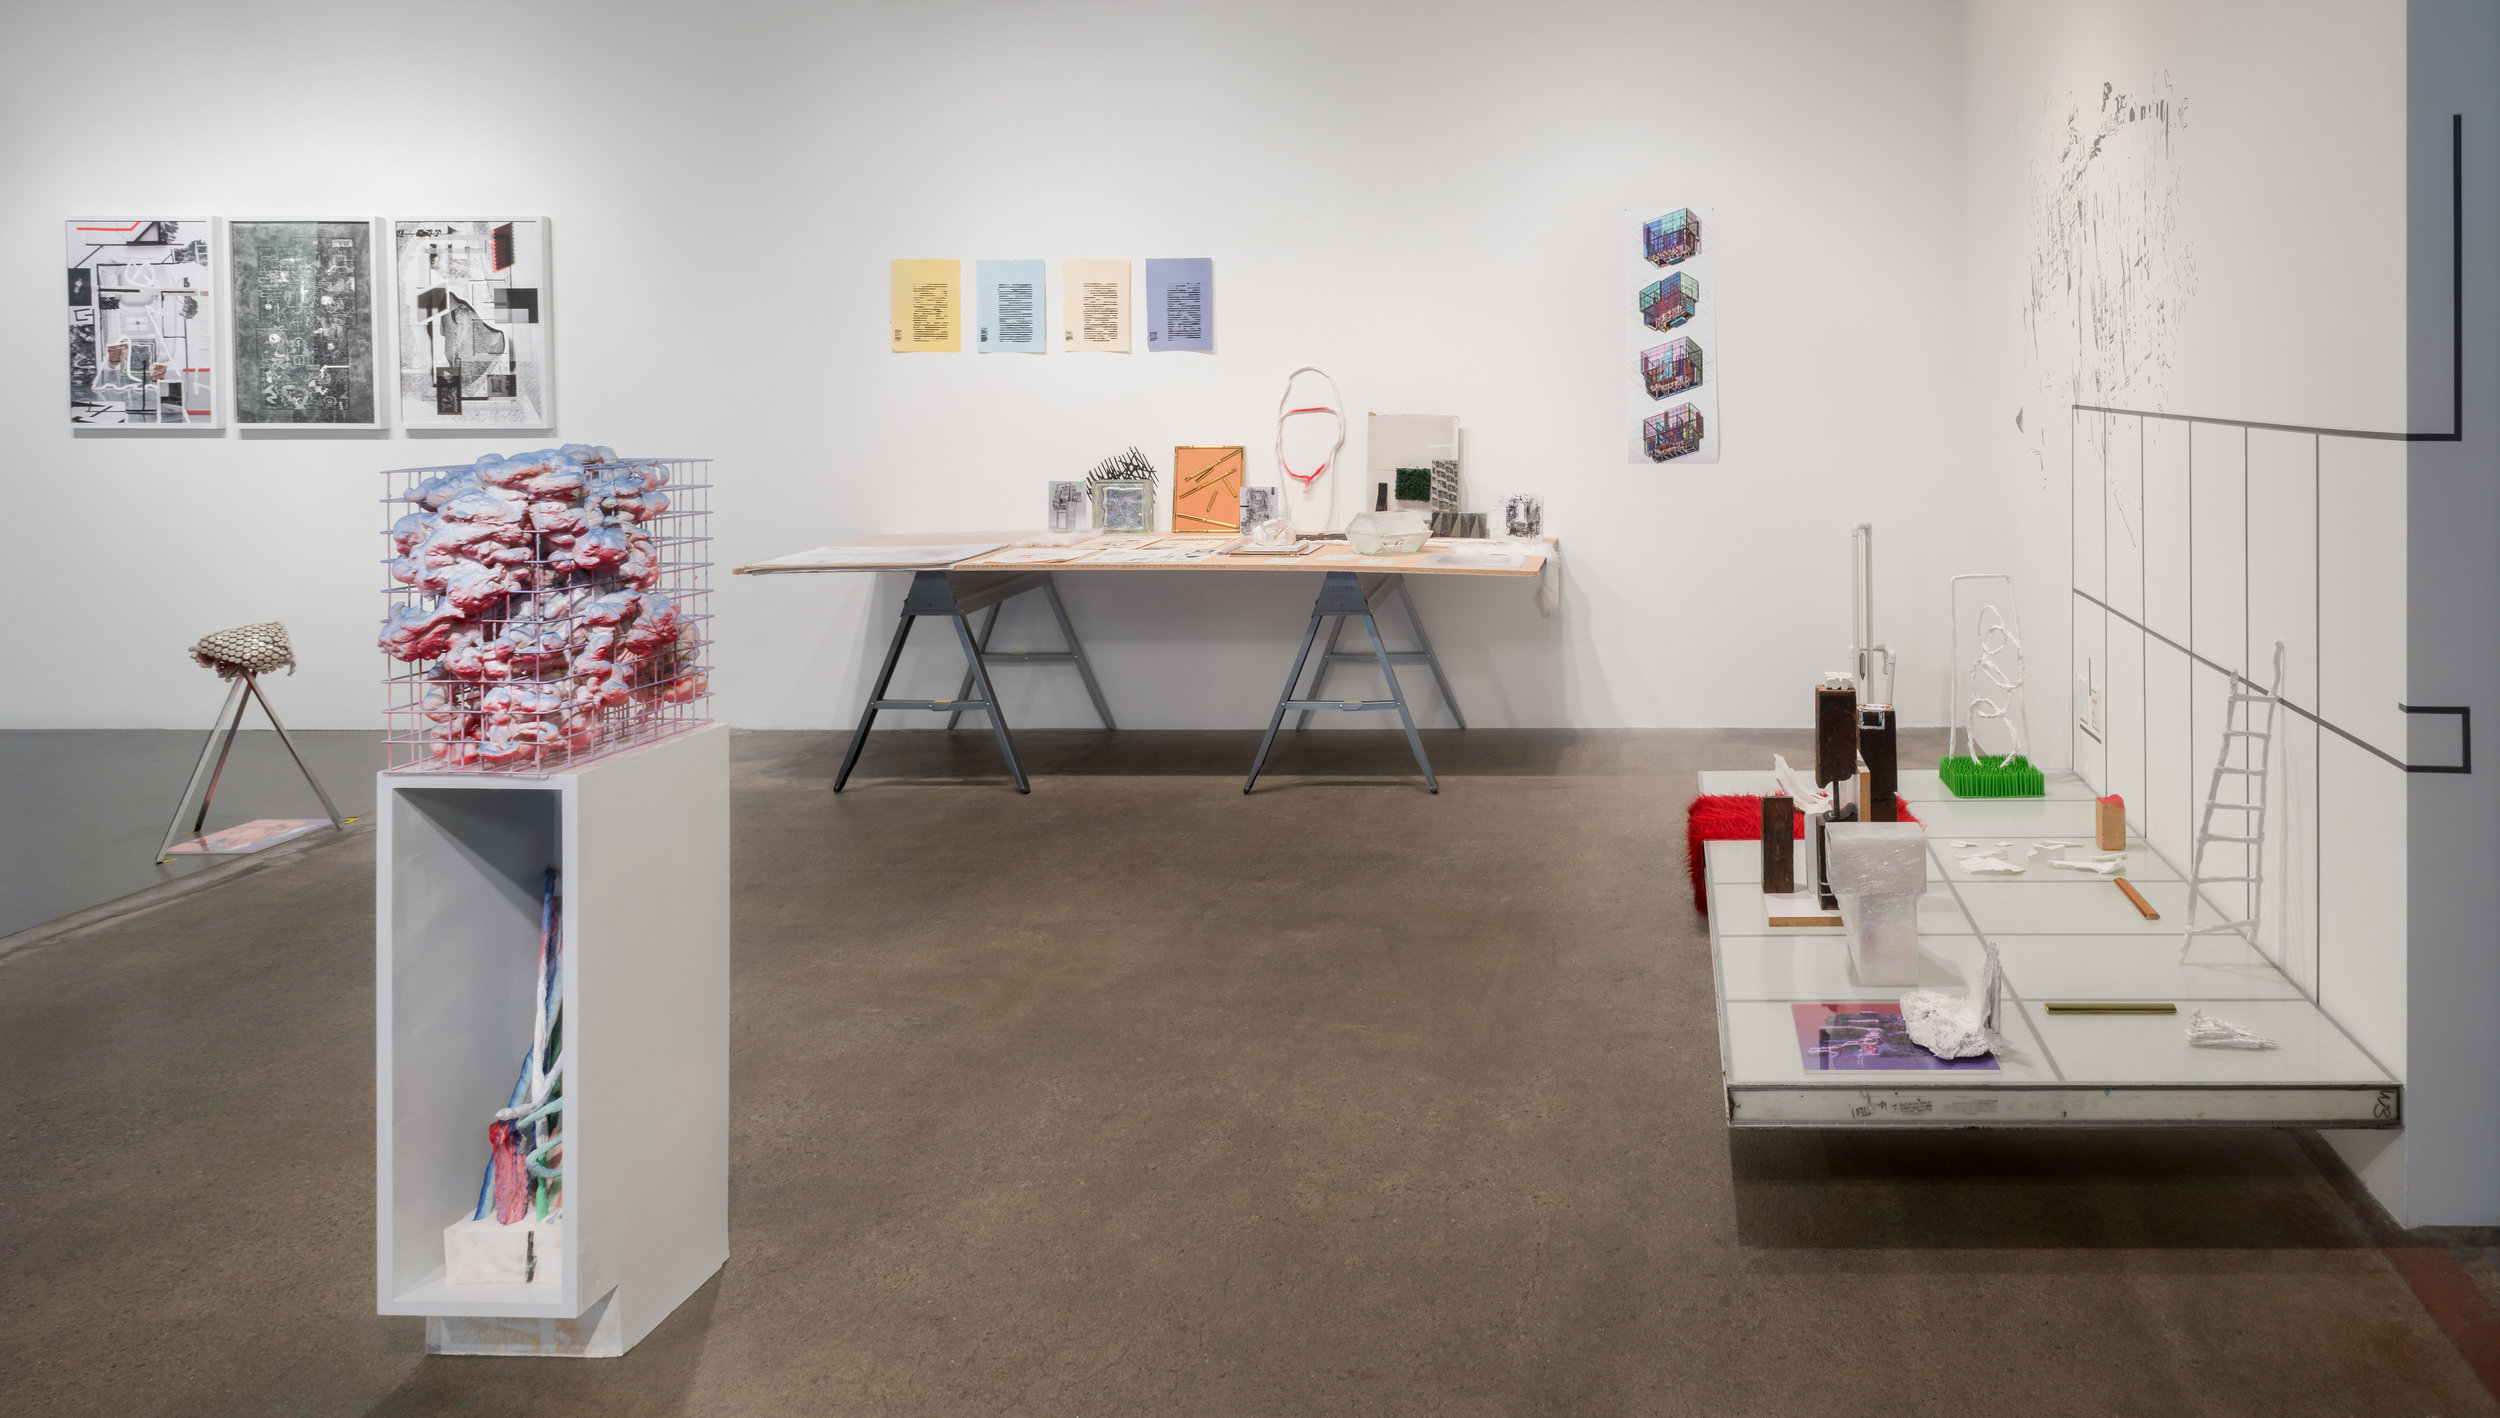 install view of "caché", gallery 4culture, photo by Joe Freeman